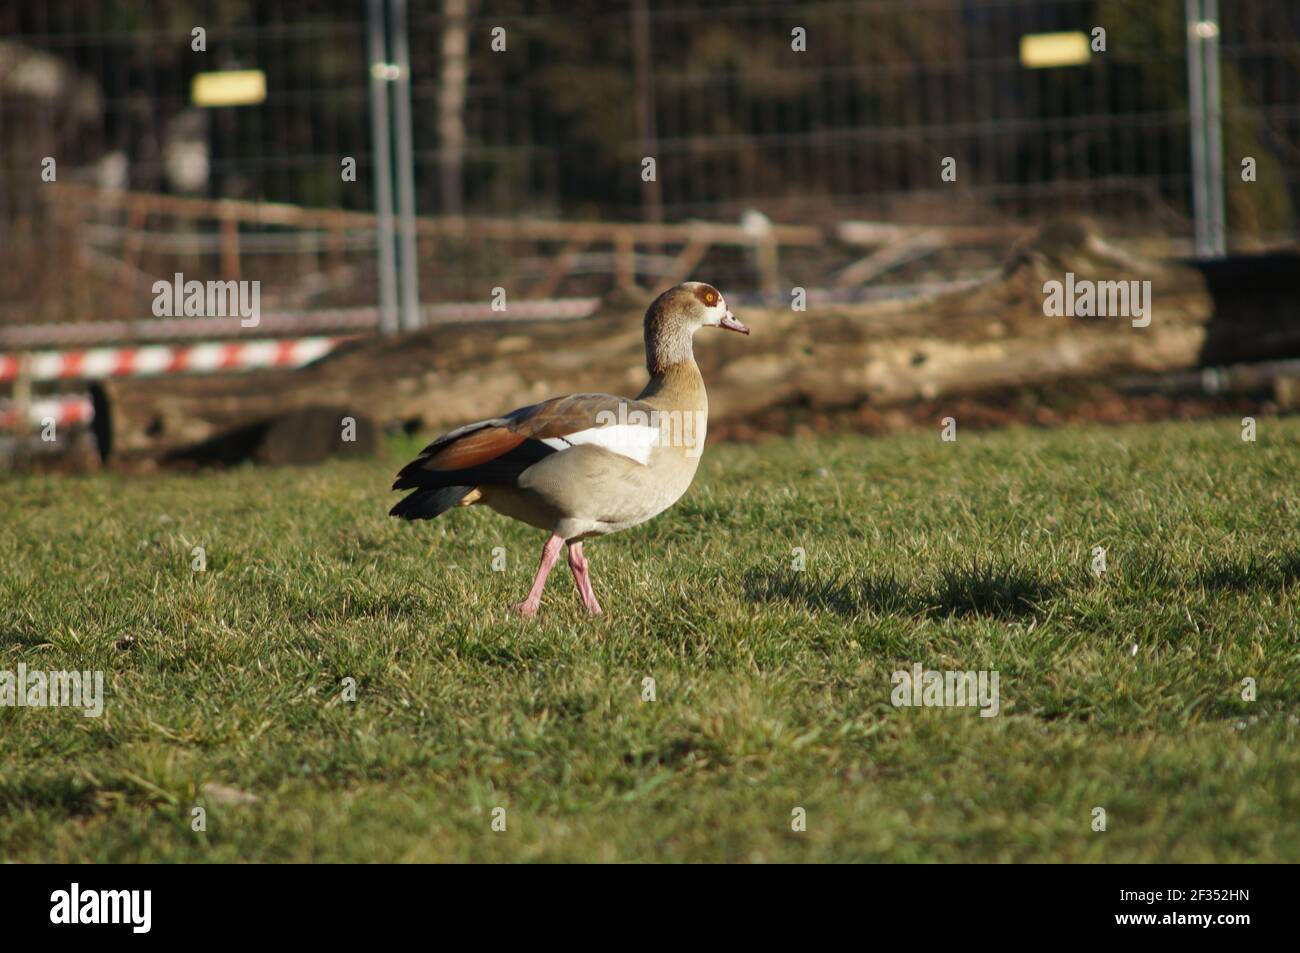 Egyptian geese are an invasive species in Frankfurt, Germany. They establish themselves in parks and gardens in urban areas. Stock Photo